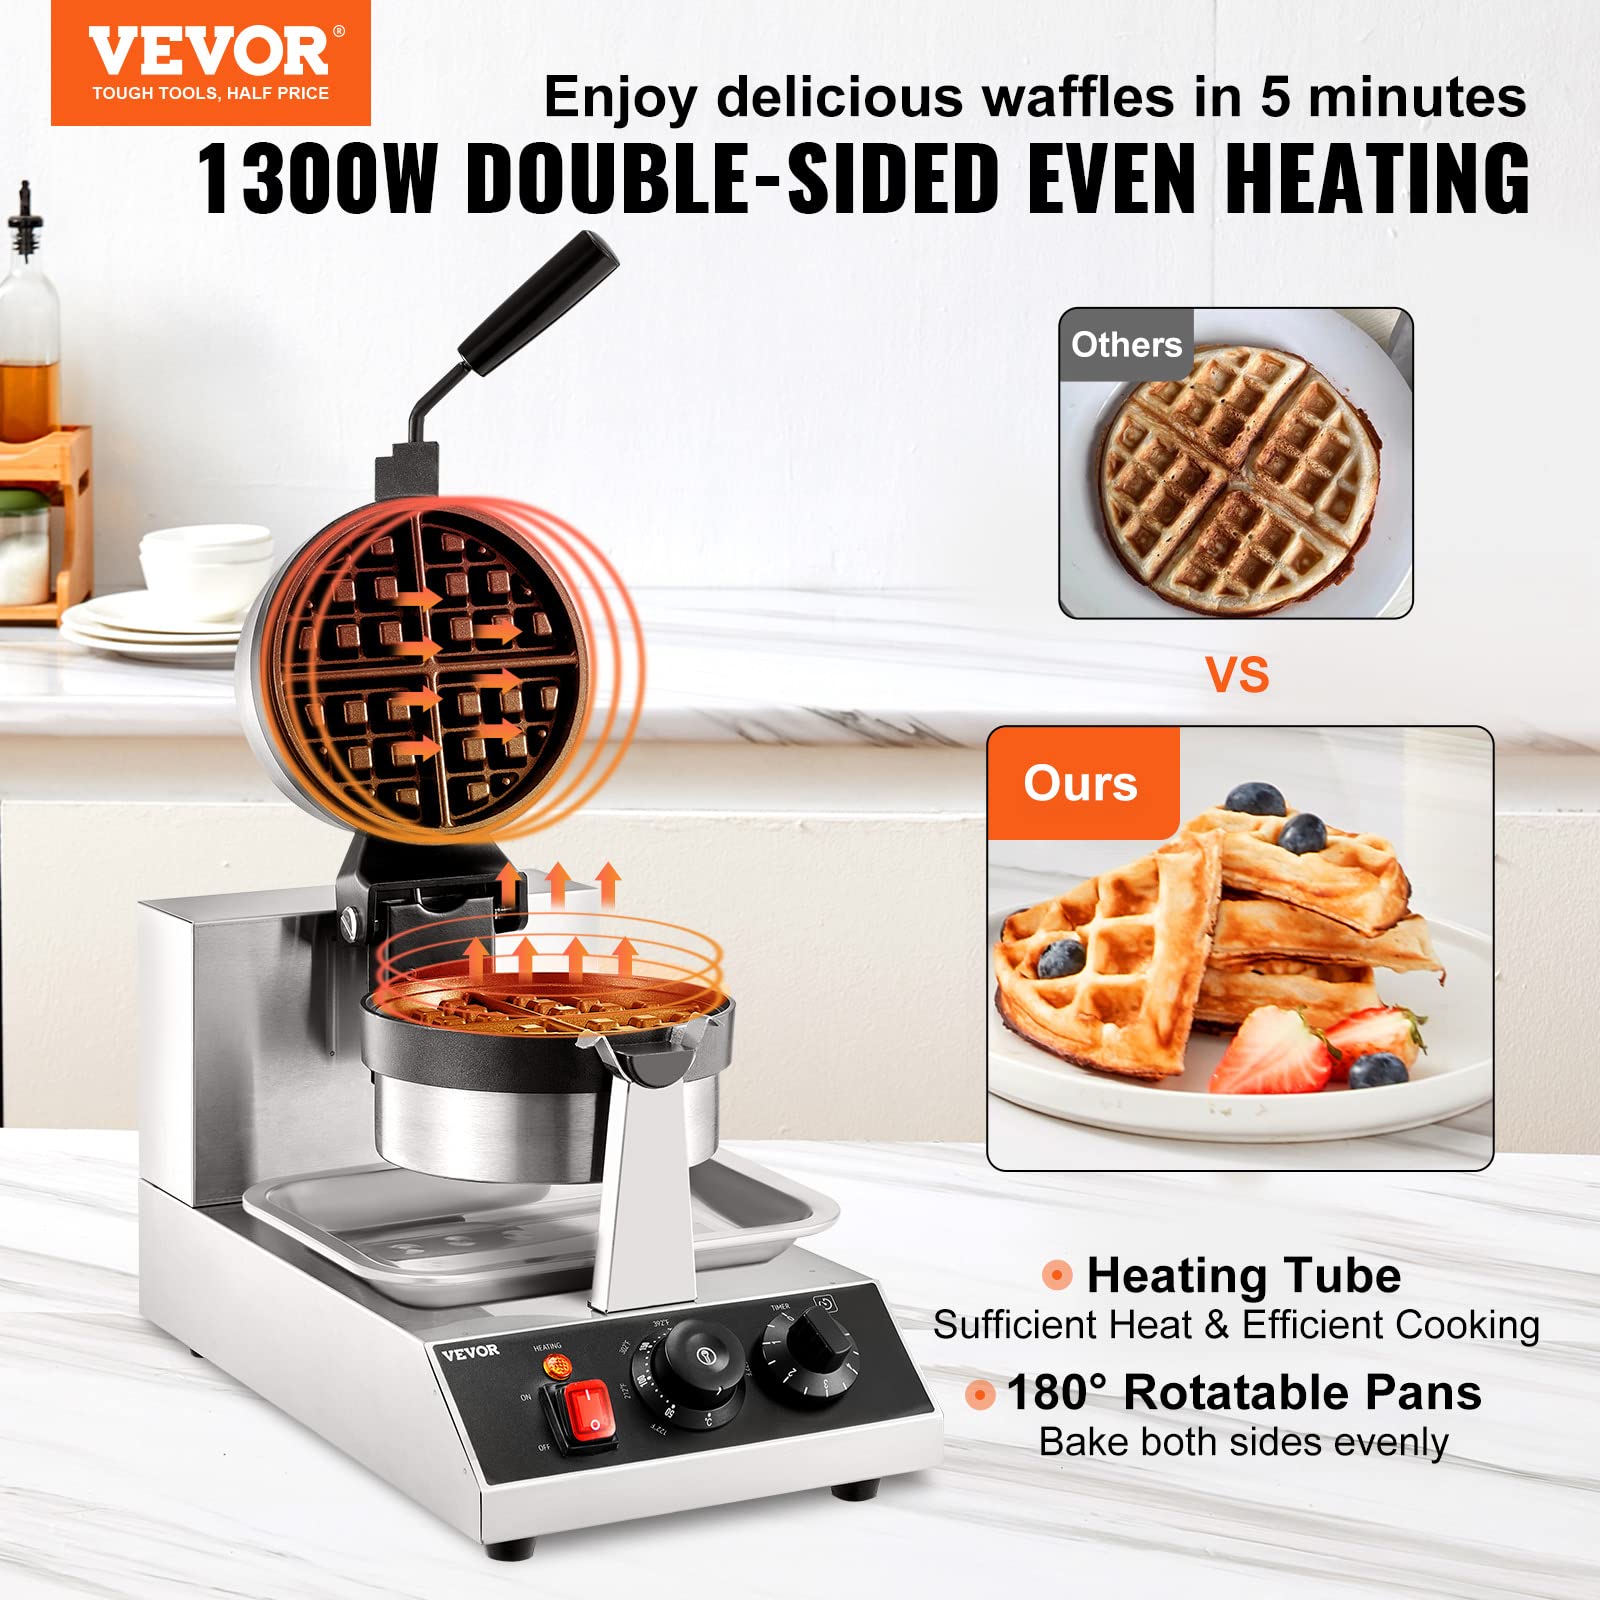 VEVOR Commercial Waffle Maker, 1300W Round Waffle Iron, Non-Stick Rotatable Waffle Baker Machine With 122-572℉ Temp Range and Time Control, Teflon-Coated Baking Pan Stainless Steel Body 120V